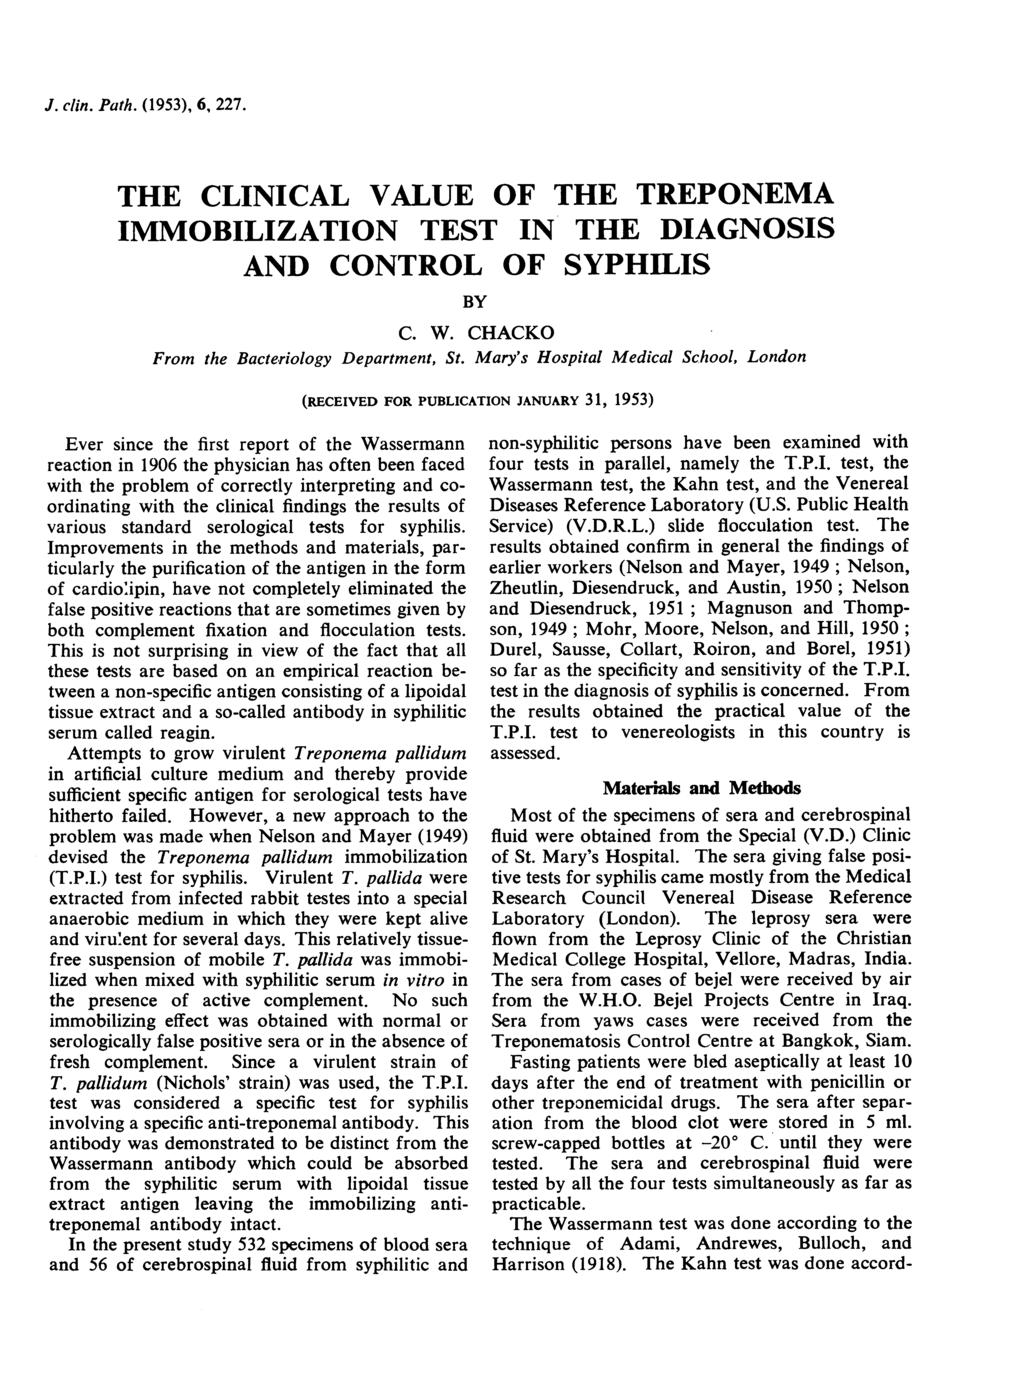 J. clin. Path. (1953), 6, 227. THE CLINICAL VALUE OF THE TREPONEMA IMMOBILIZATION TEST IN THE DIAGNOSIS AND CONTROL OF SYPHILIS BY From the Bacteriology Department, St.